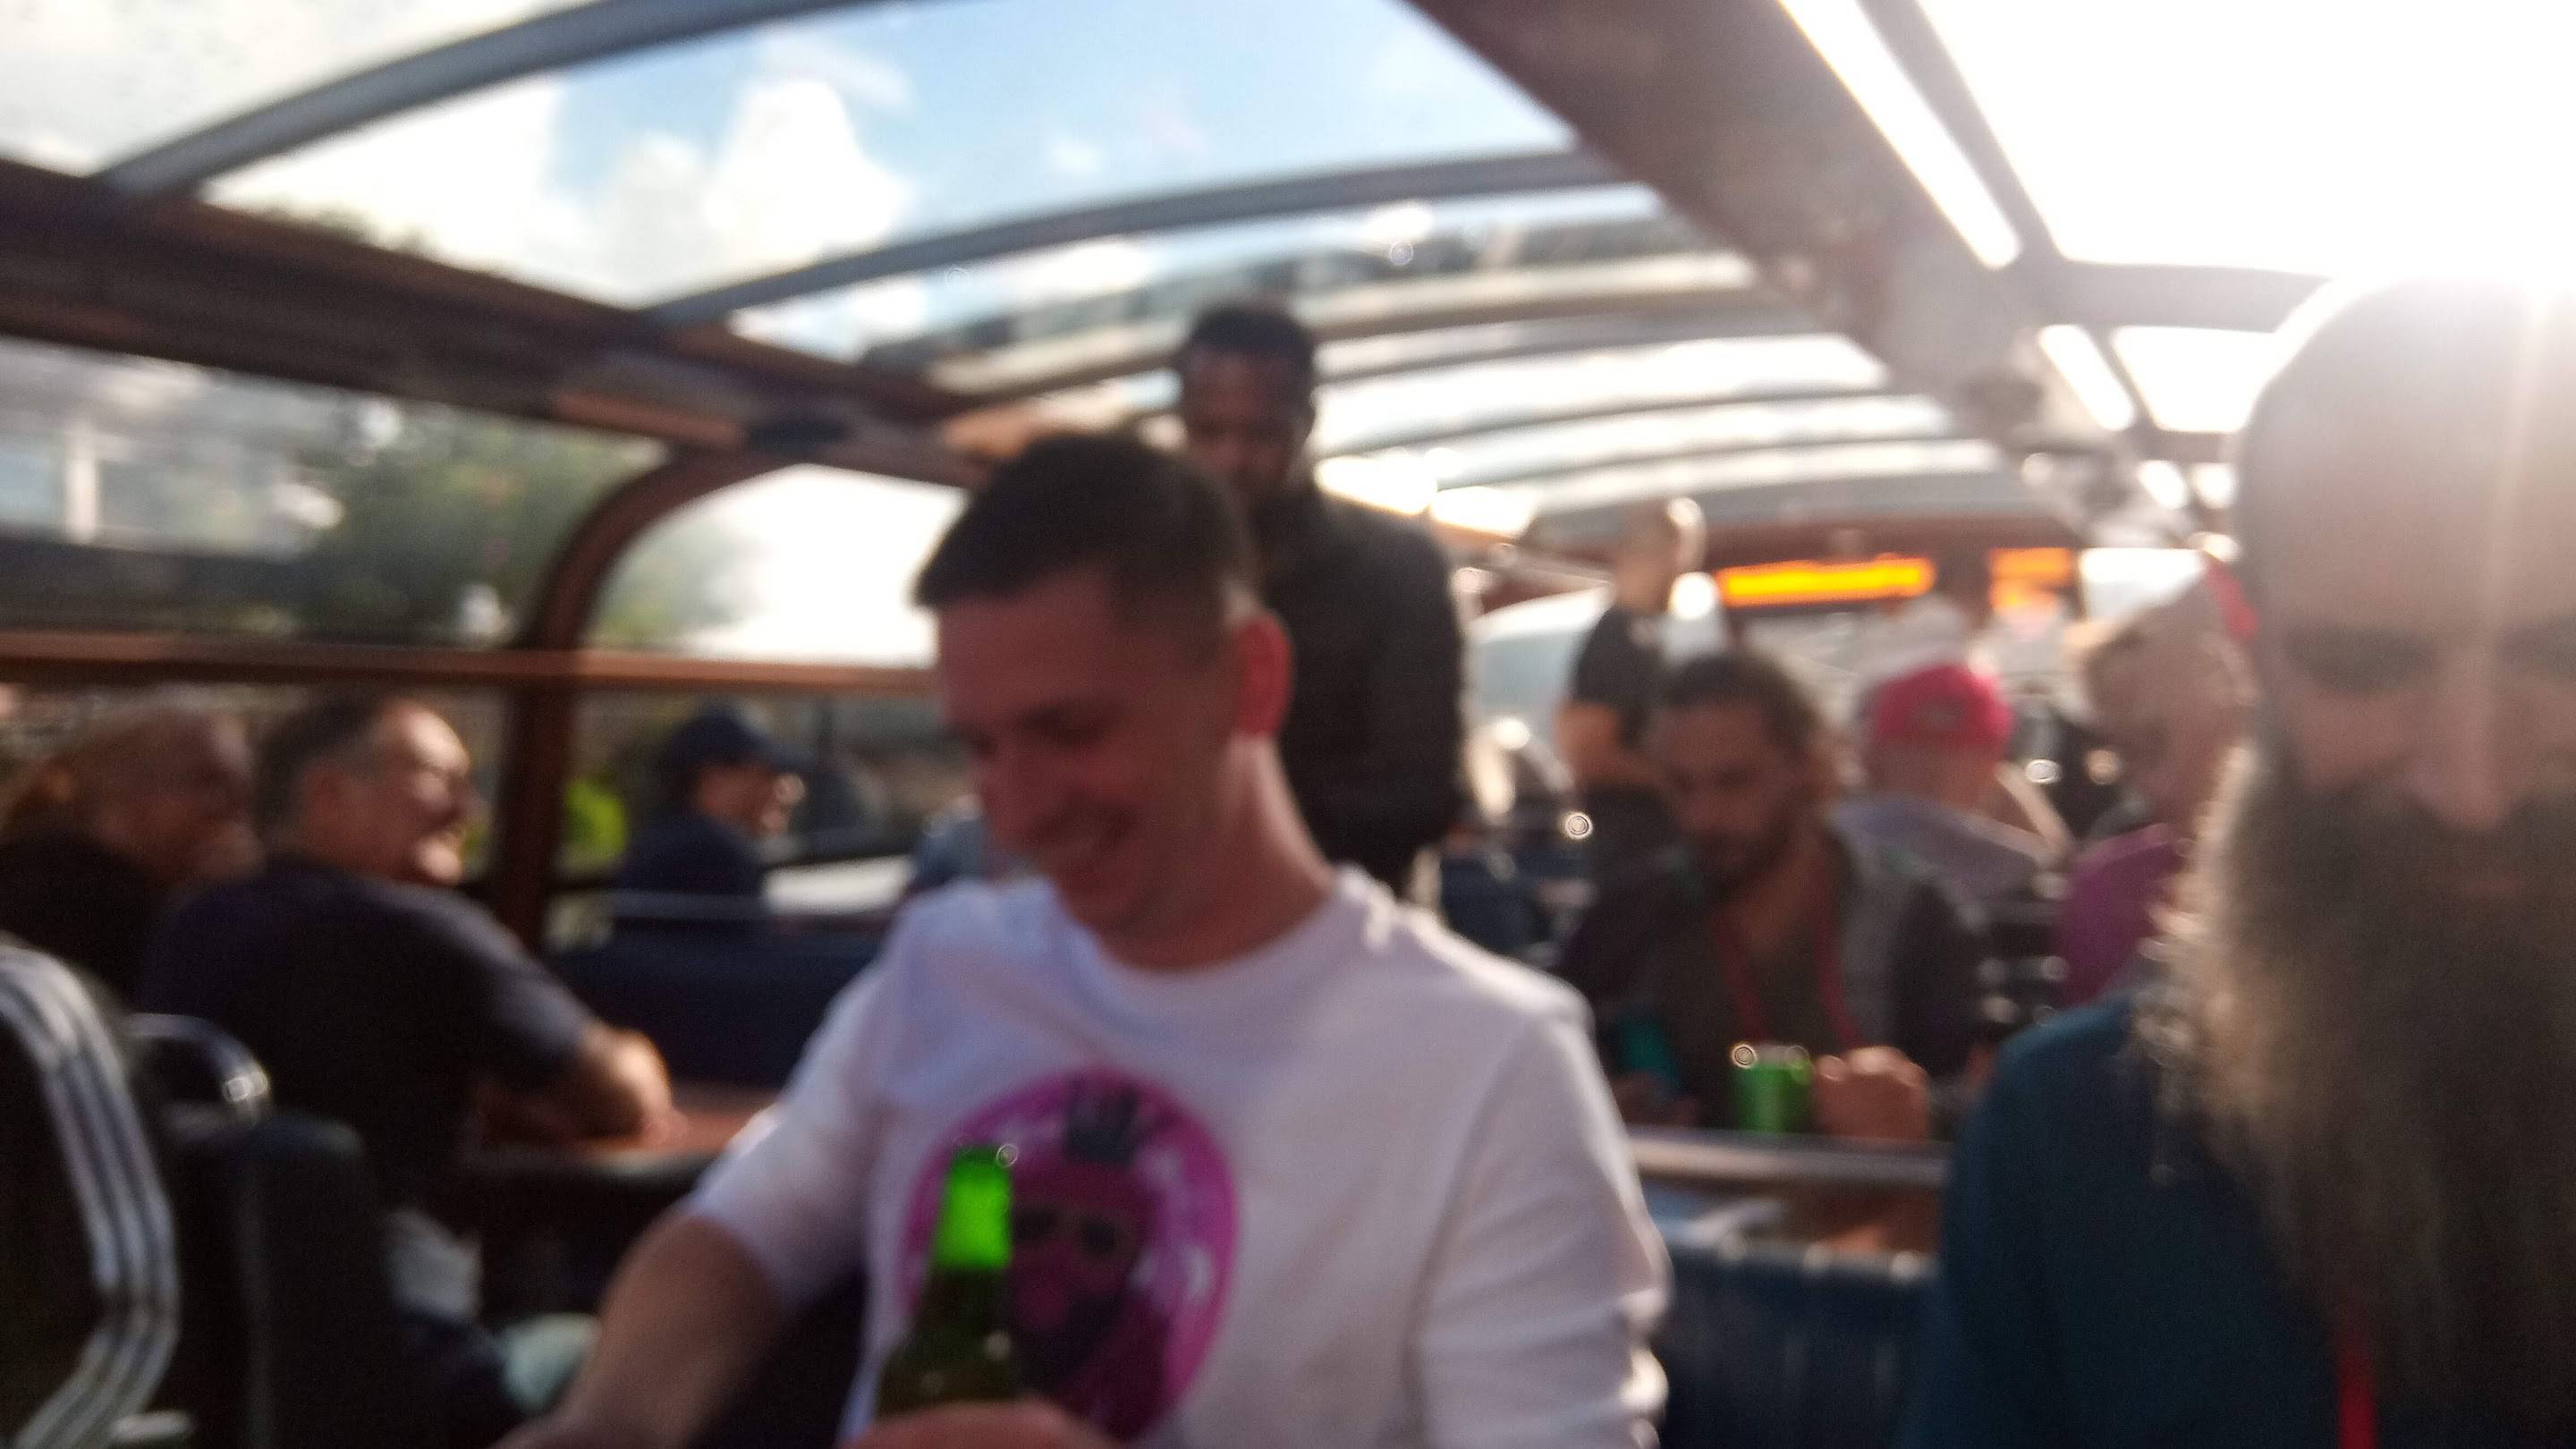 Bit of a hazy pic (phone had been on the beers). That’s @minigunner, one half of the Beet Boys and @revisesociology on the right